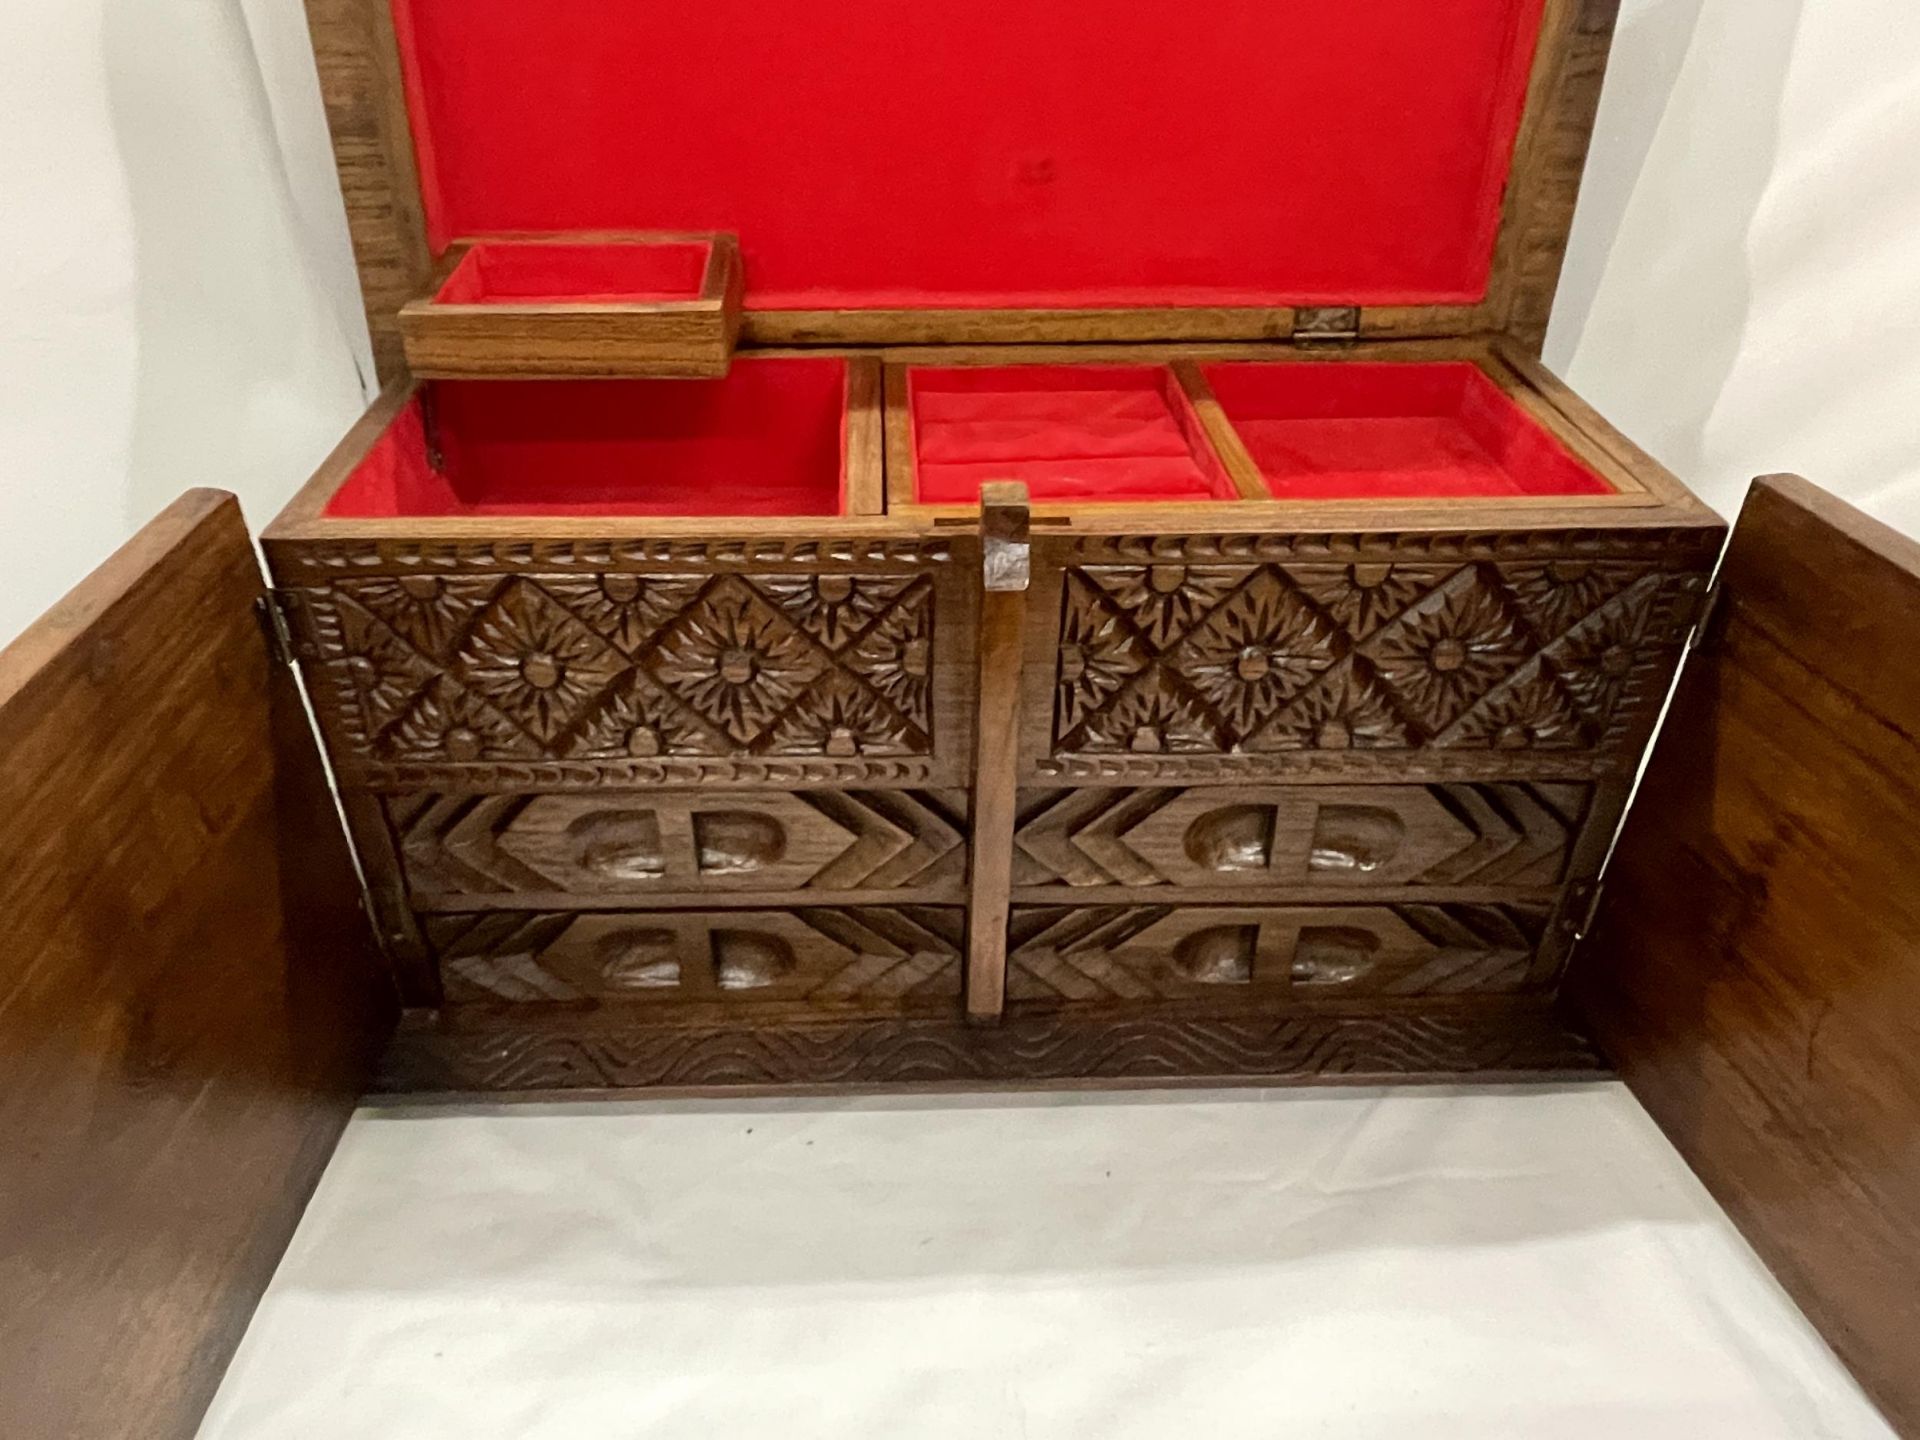 A HEAVILY CARVED JEWELLERY BOX WITH TWO DOORS REVEALING FOUR LINED DRAWERS AND A LIFT UP LID WITH - Image 3 of 4